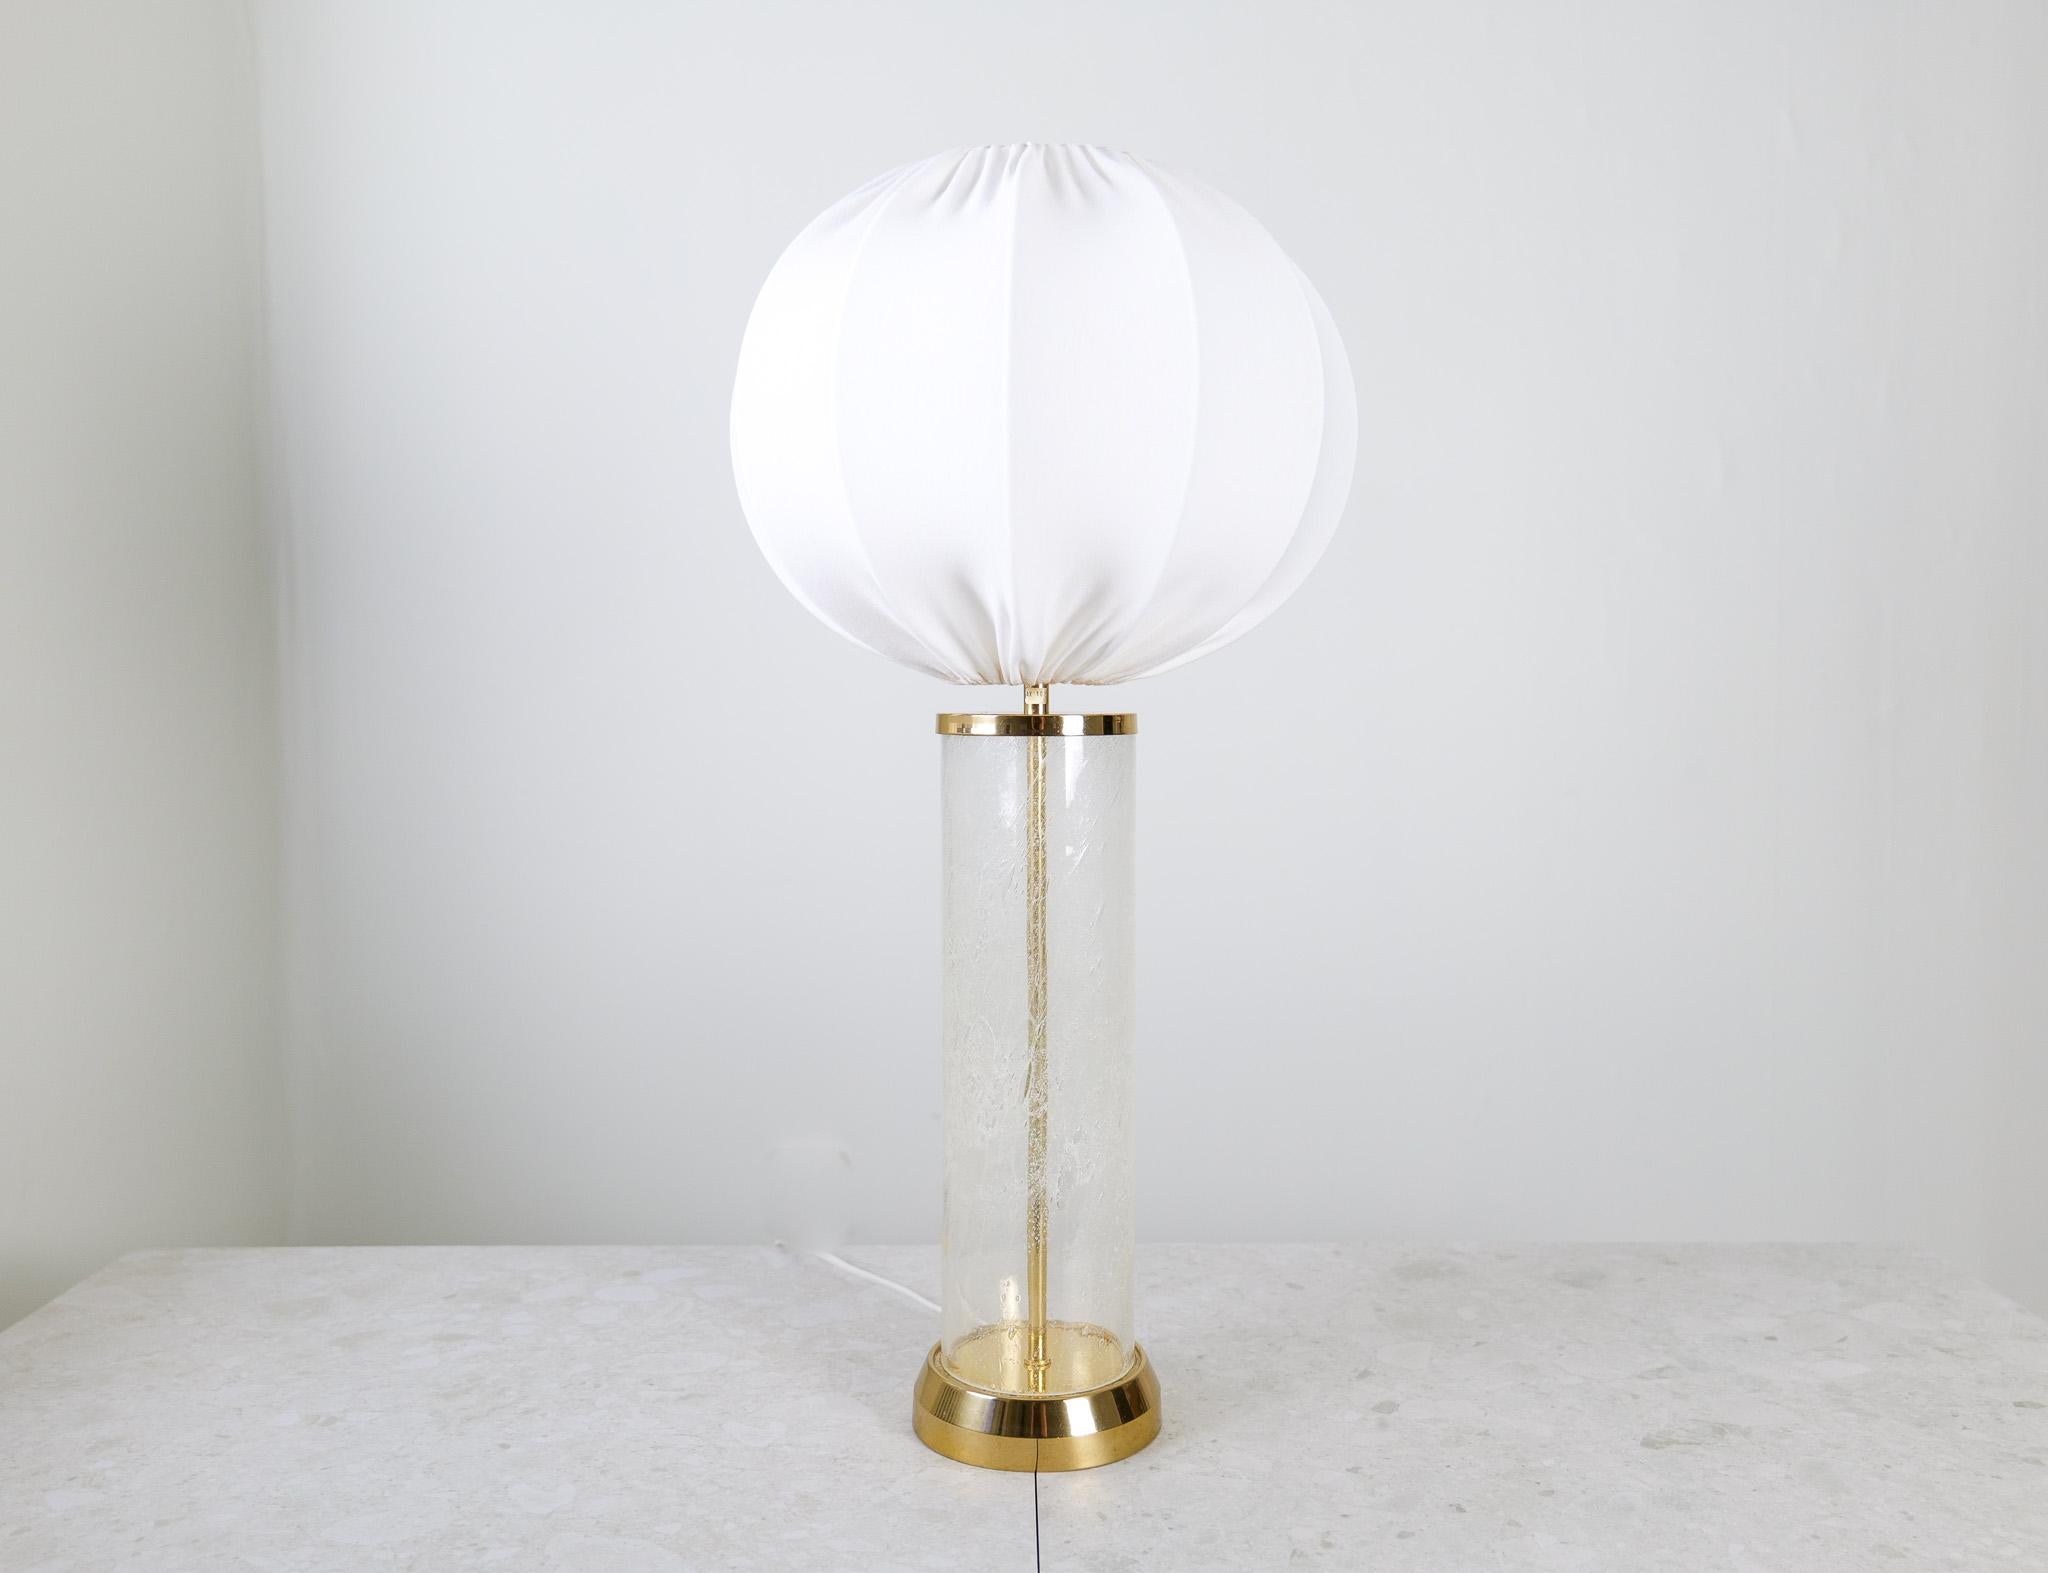 Swedish Midcentury Modern Glass and Brass Table Lamp Bergbom B-019 Sweden 1960s For Sale